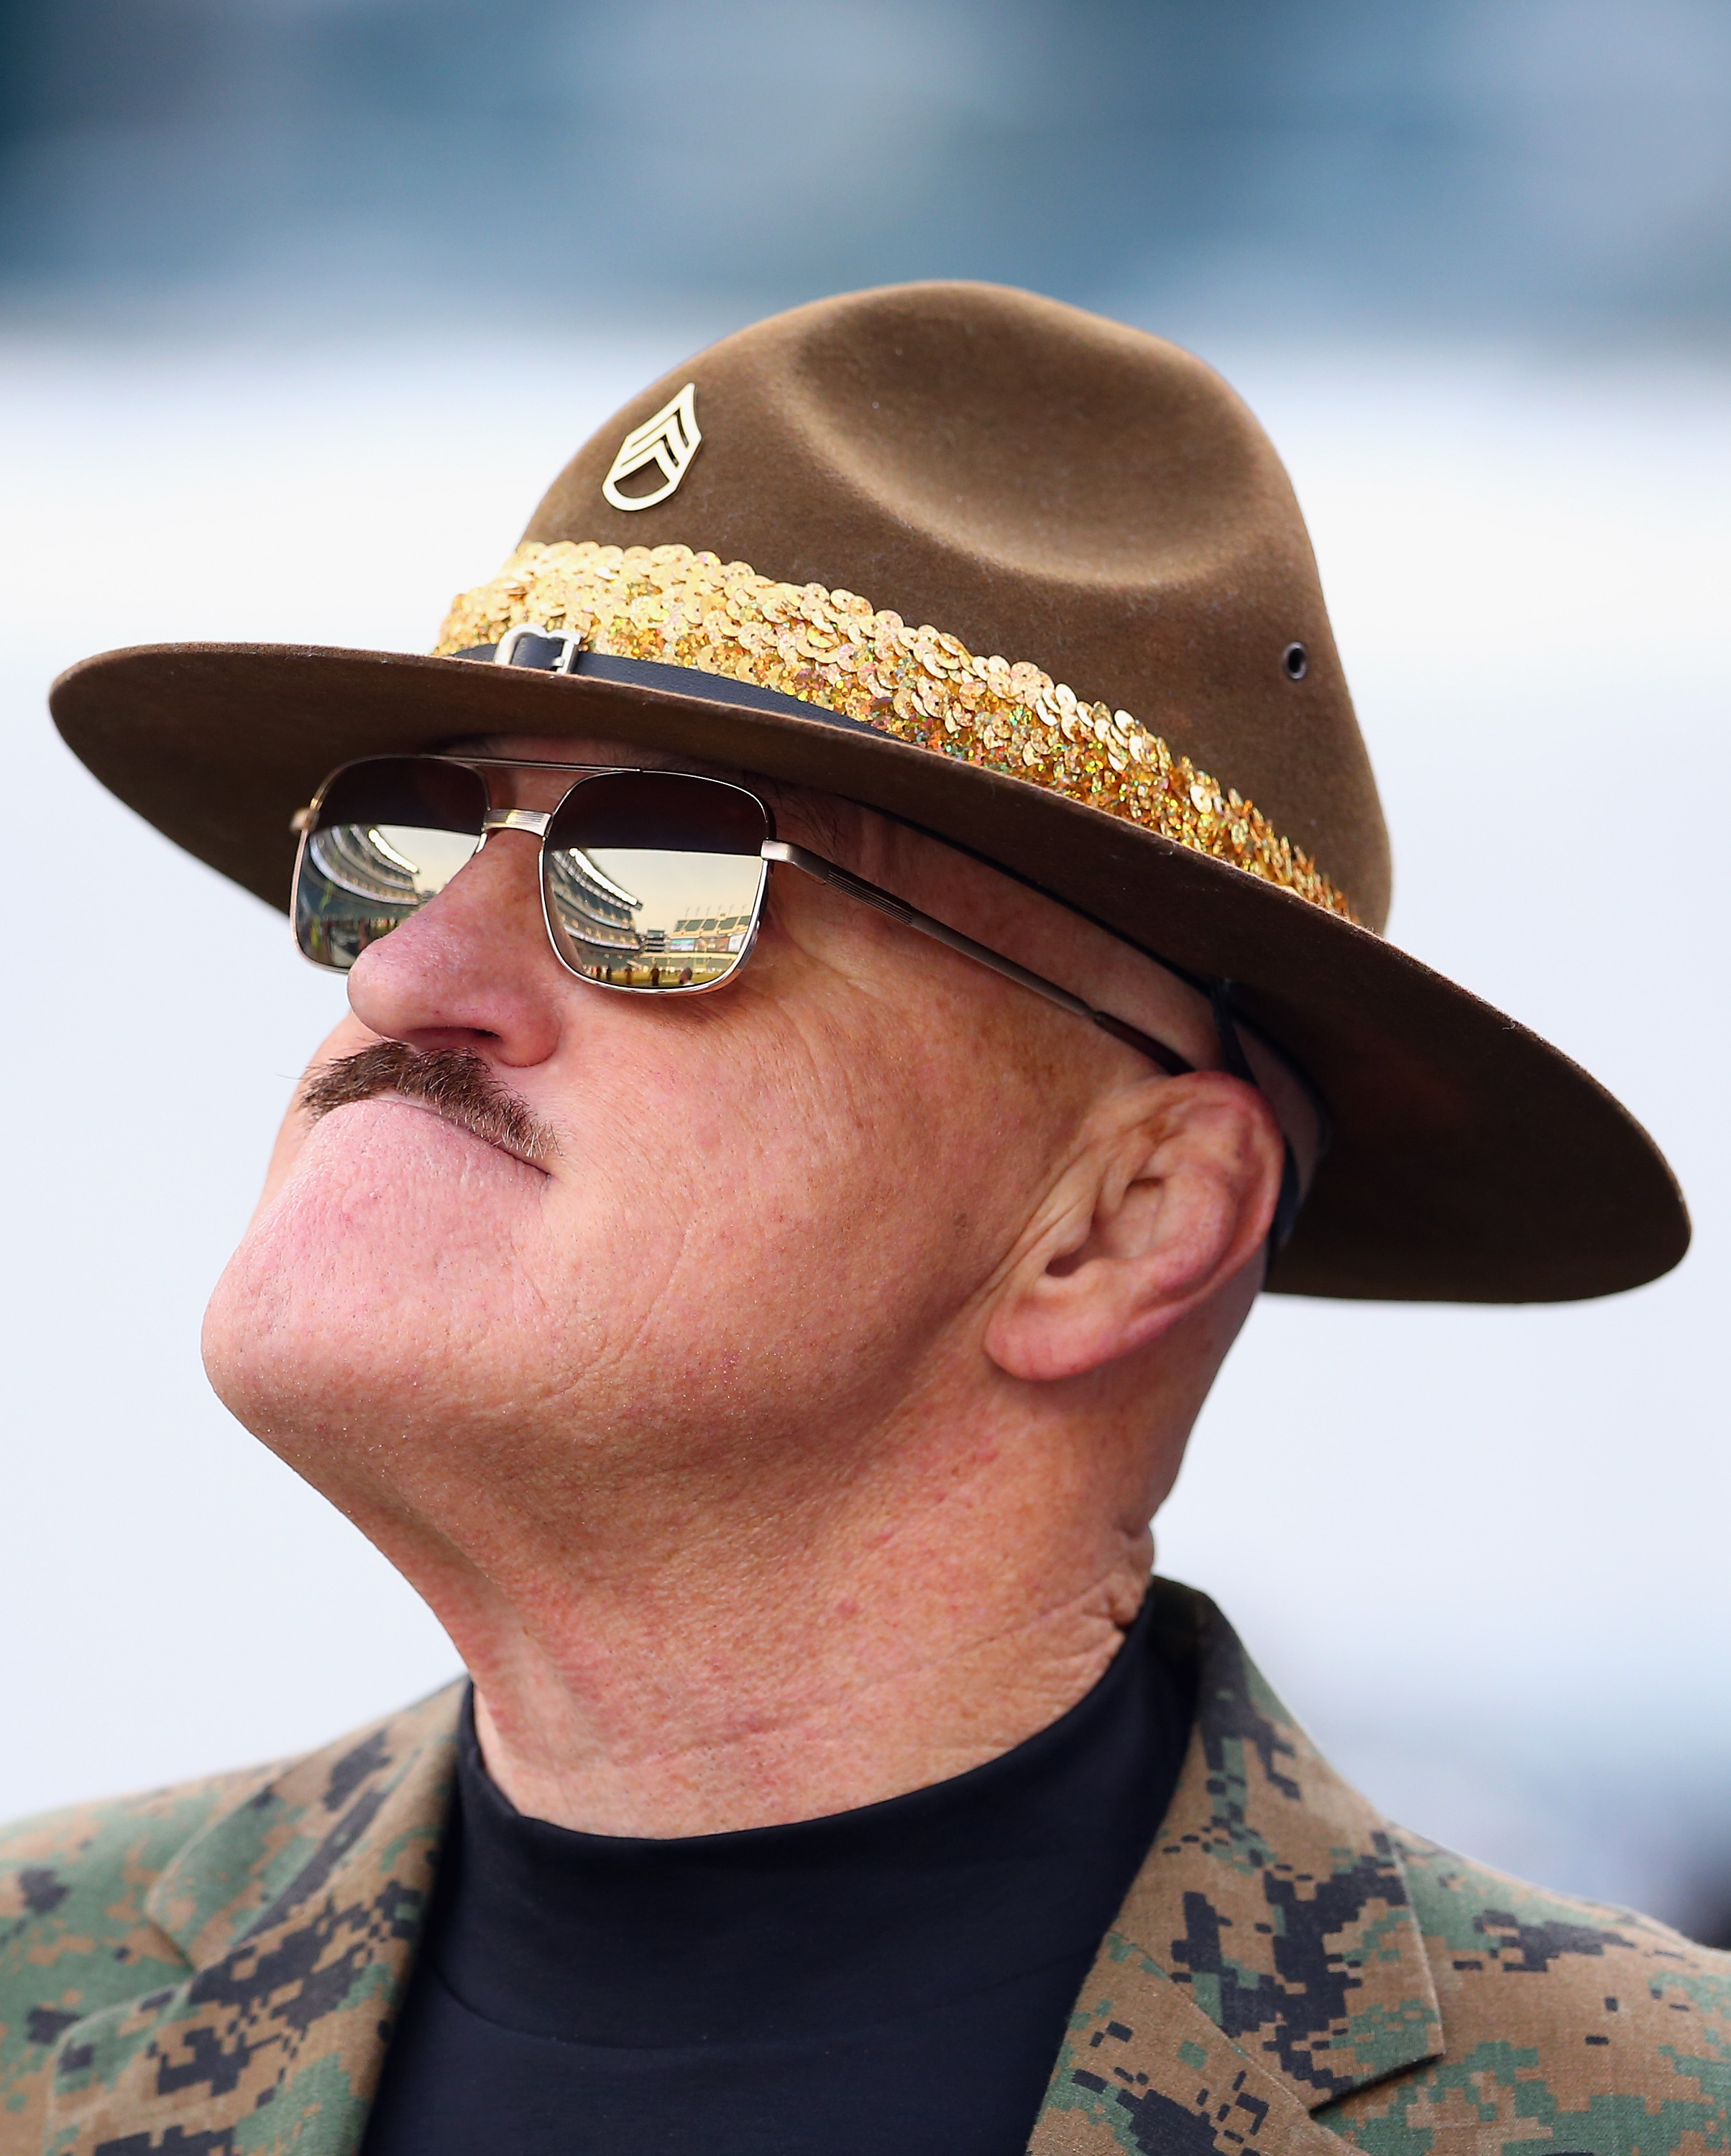 Sgt. Slaughter (WWE) photo